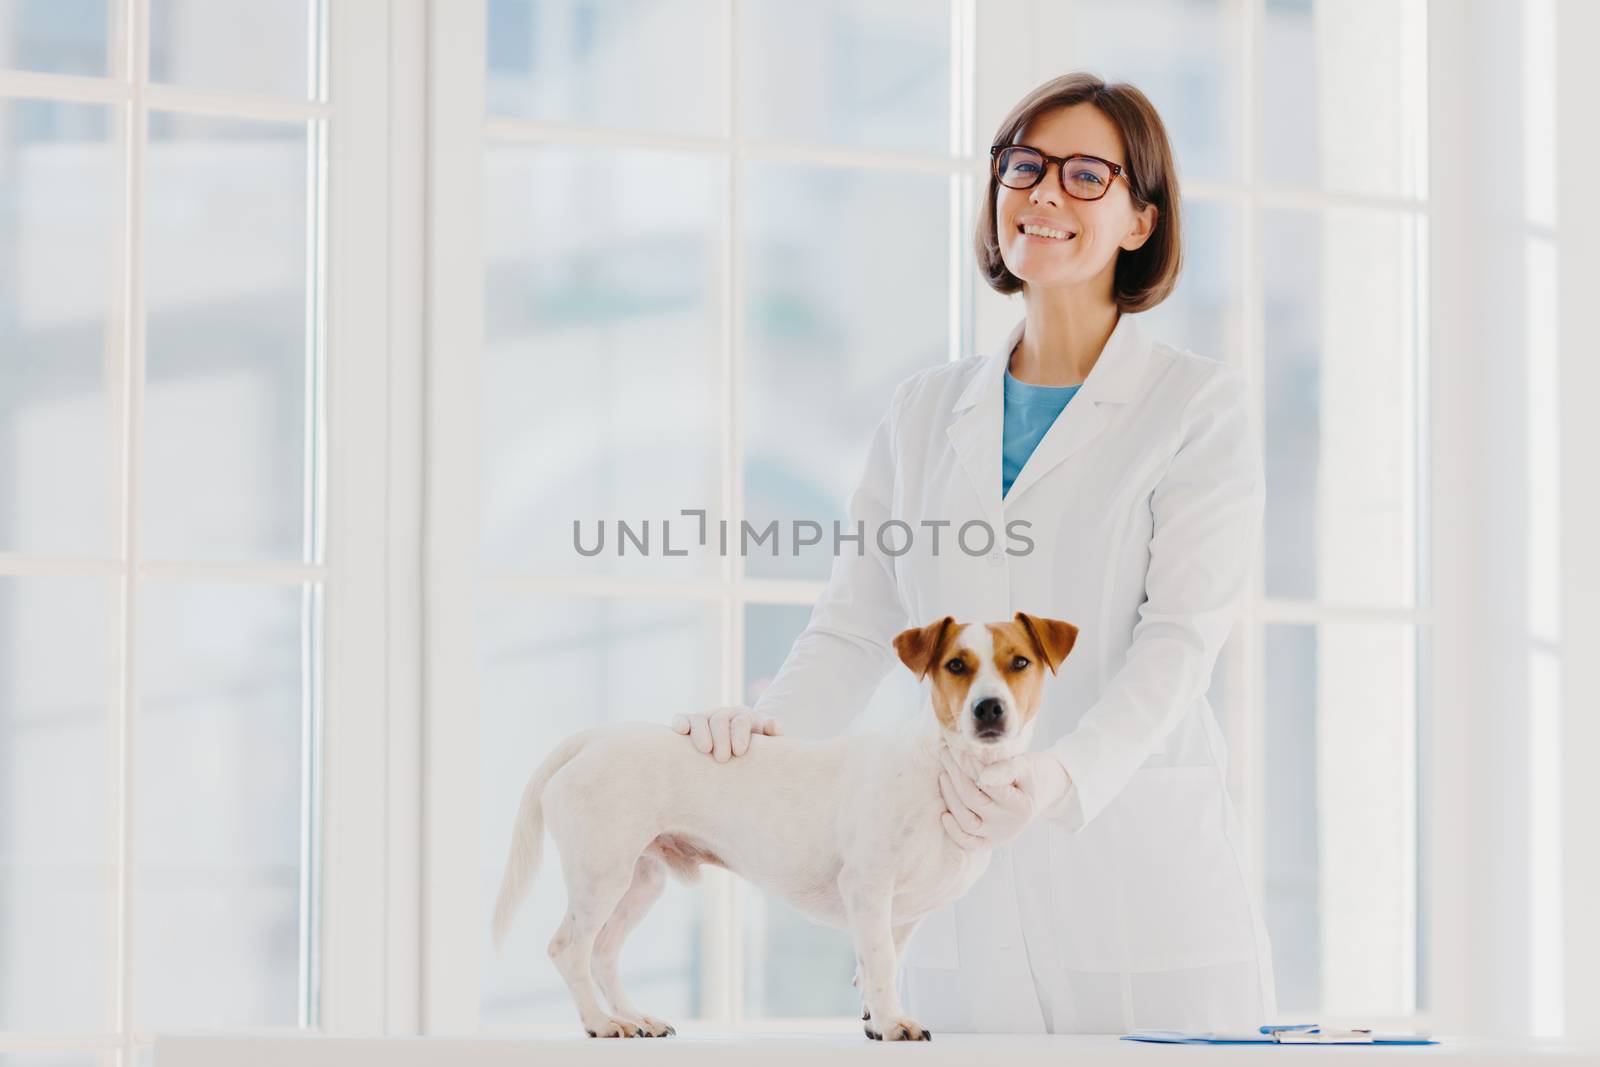 Pedigree dog russell terrier examined and consulted by veterinarian, pose near examination table in vet clinic, going to have vaccination in medical office. Domestic animal visits good doctor by vkstock